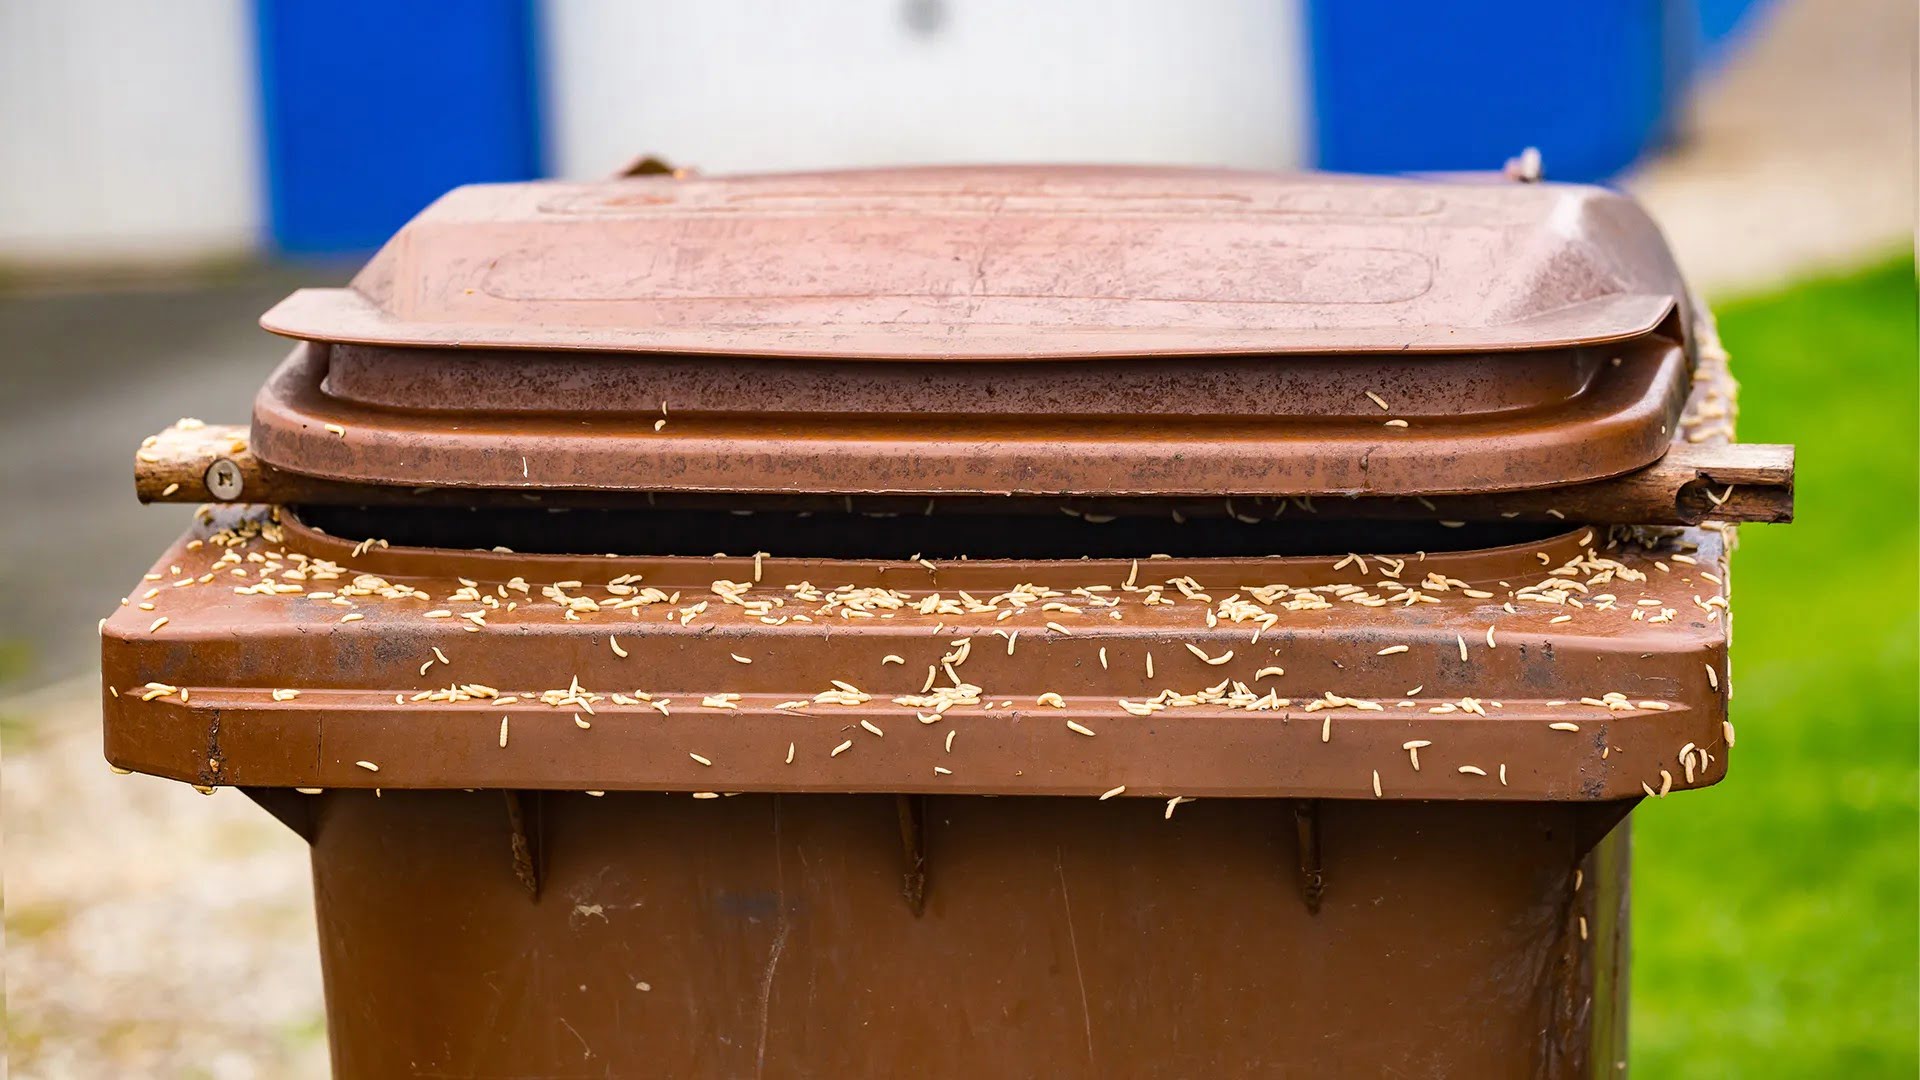 How To Prevent Maggots In An Outdoor Trash Can